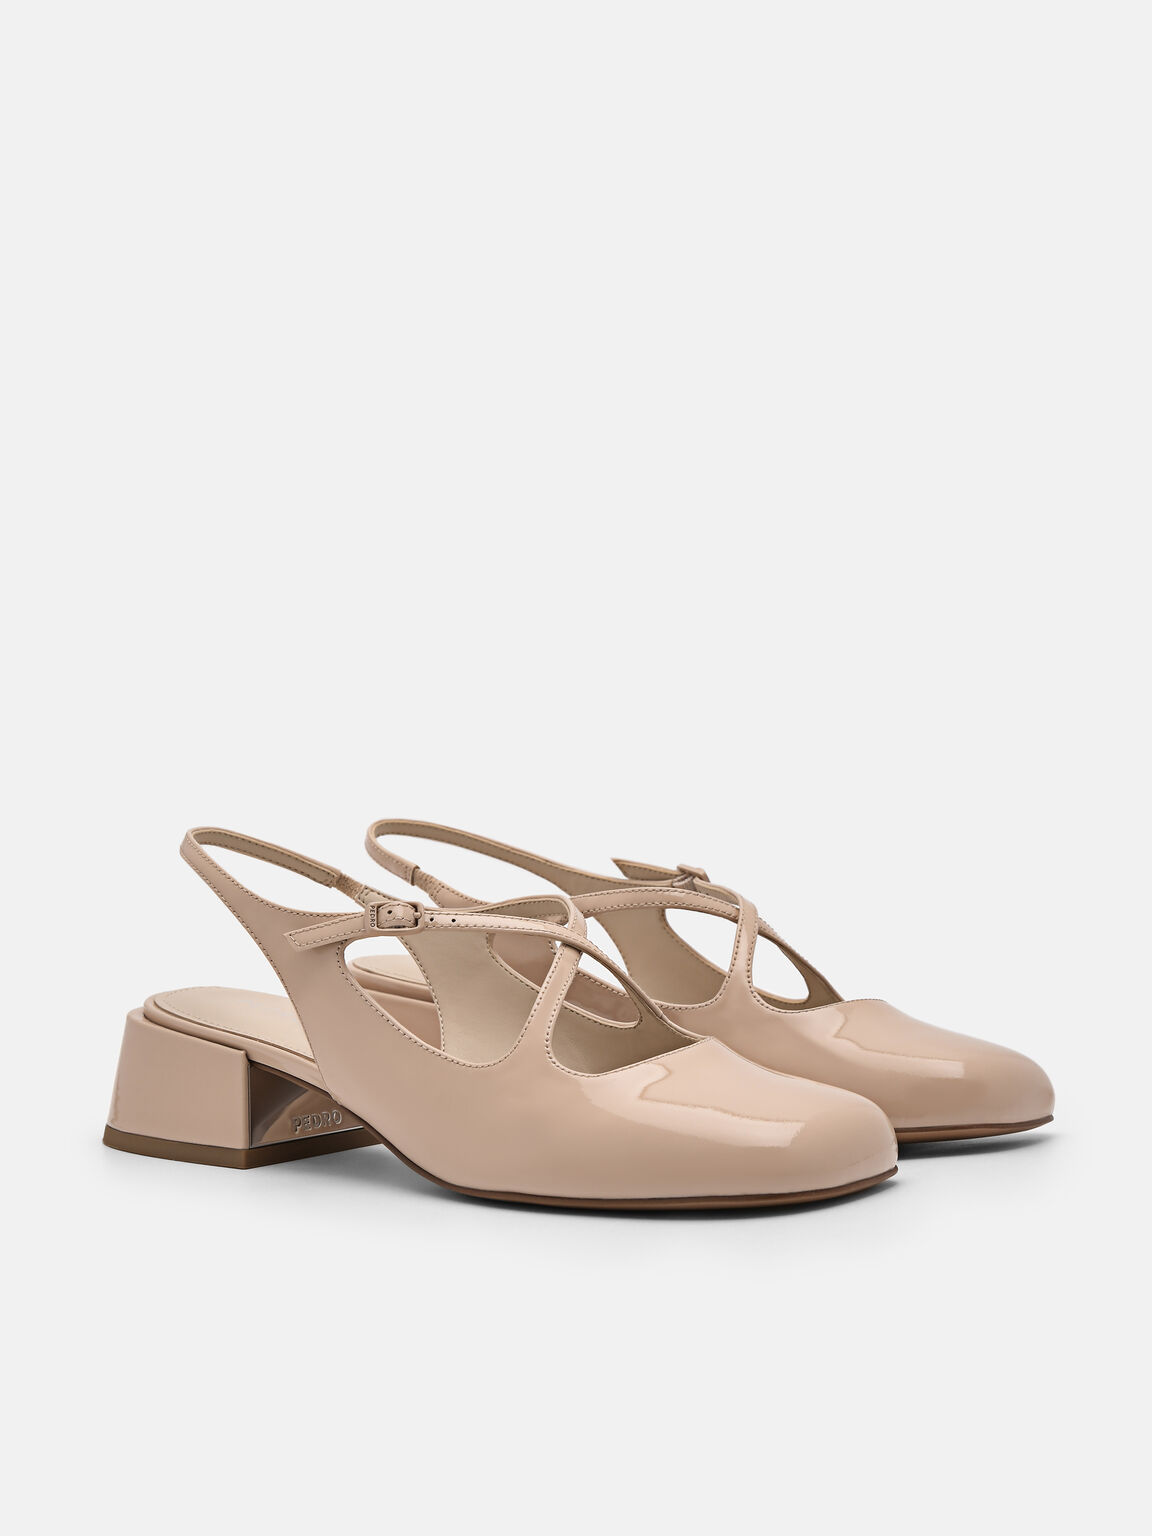 Effie Leather Mary Jane Pumps, Nude